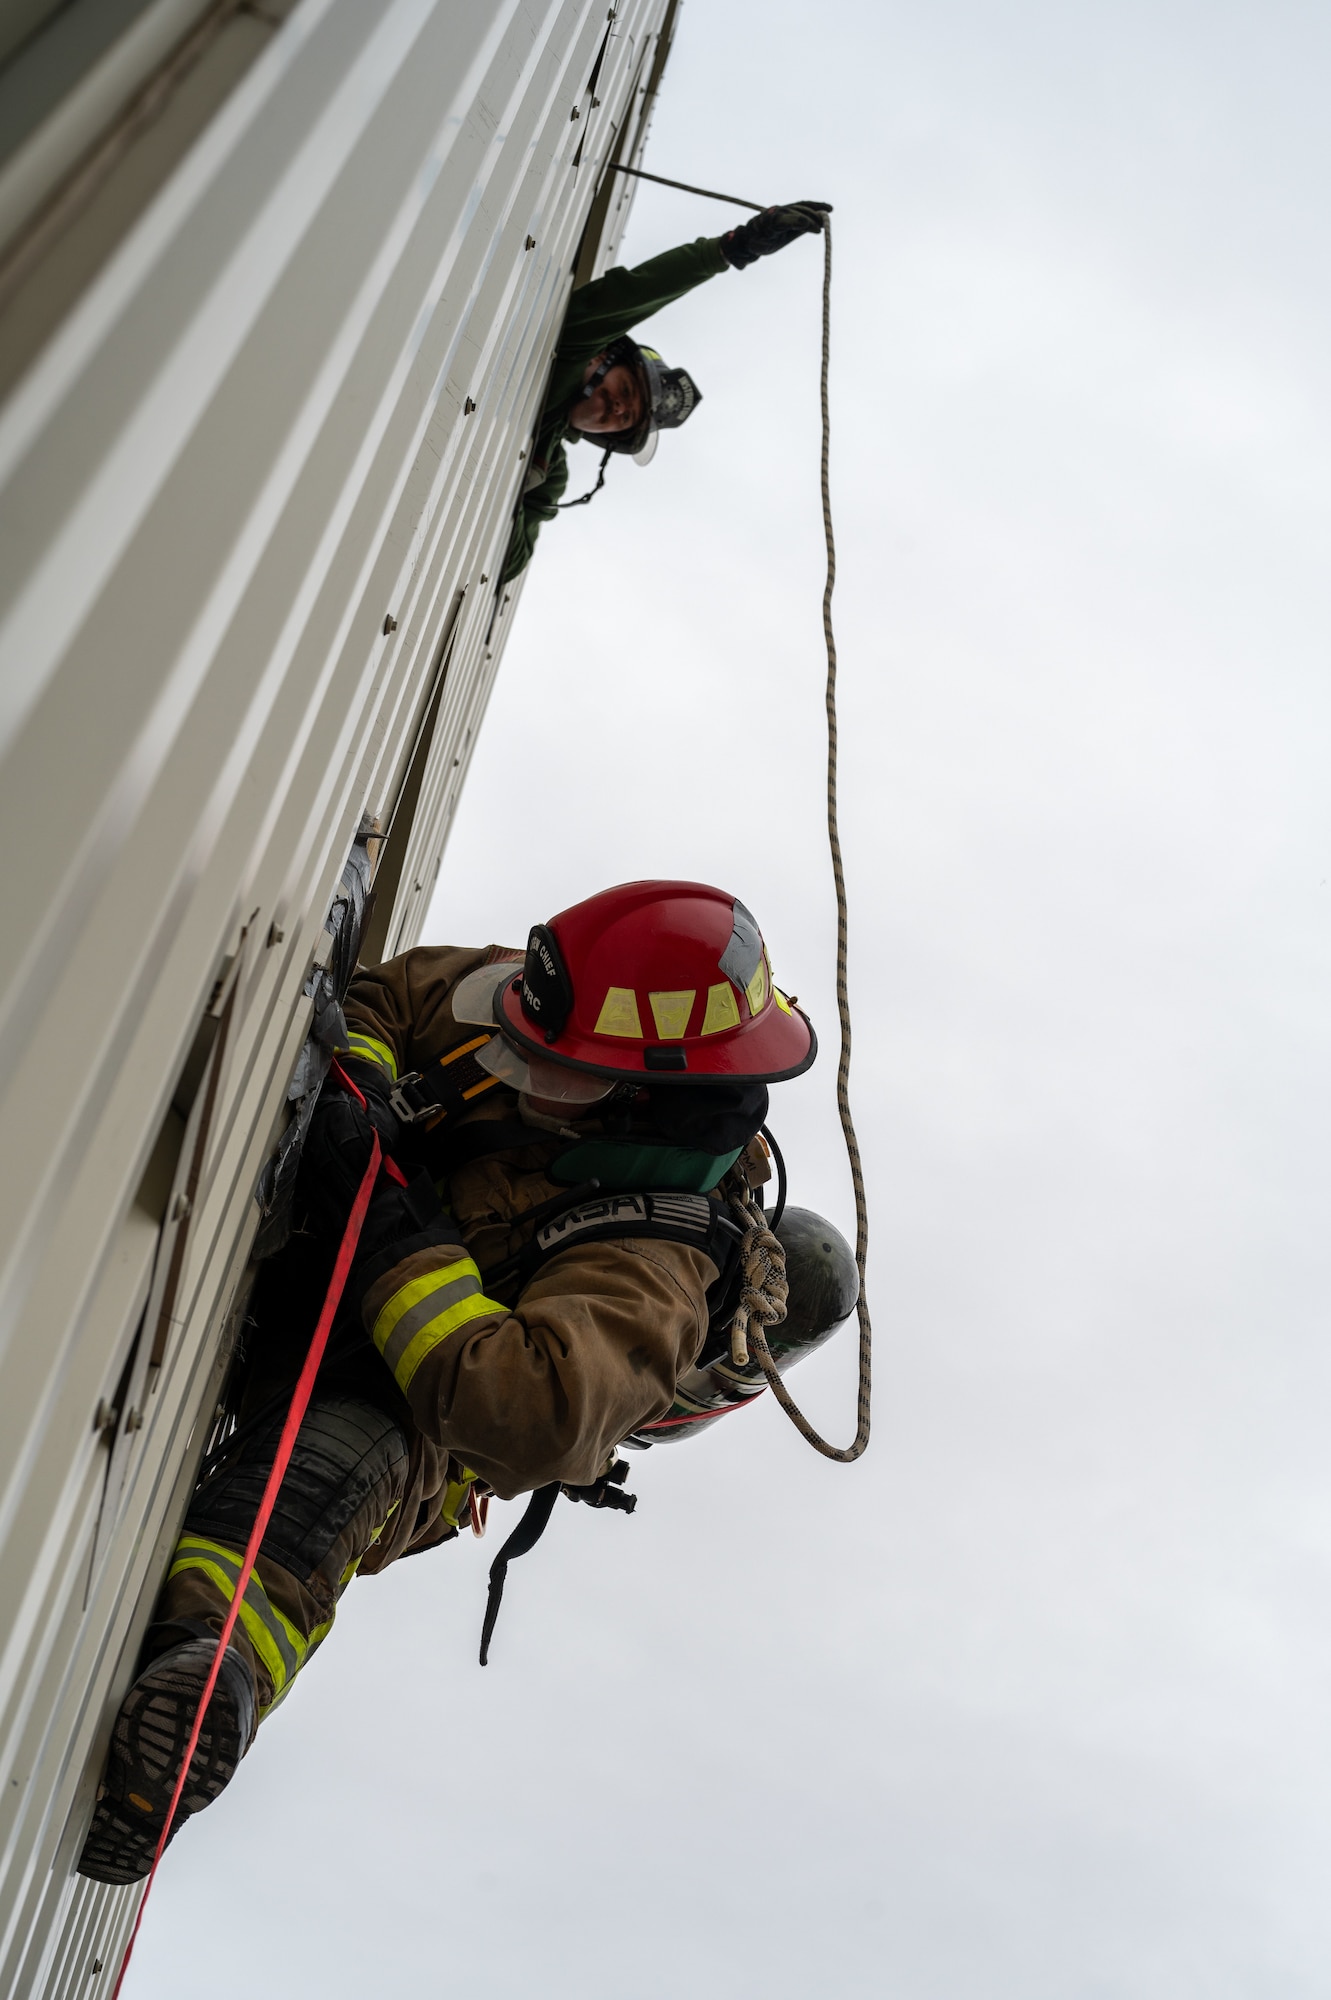 A firefighter leans out of a window while another above holds the belay line away from the exterior of the building.